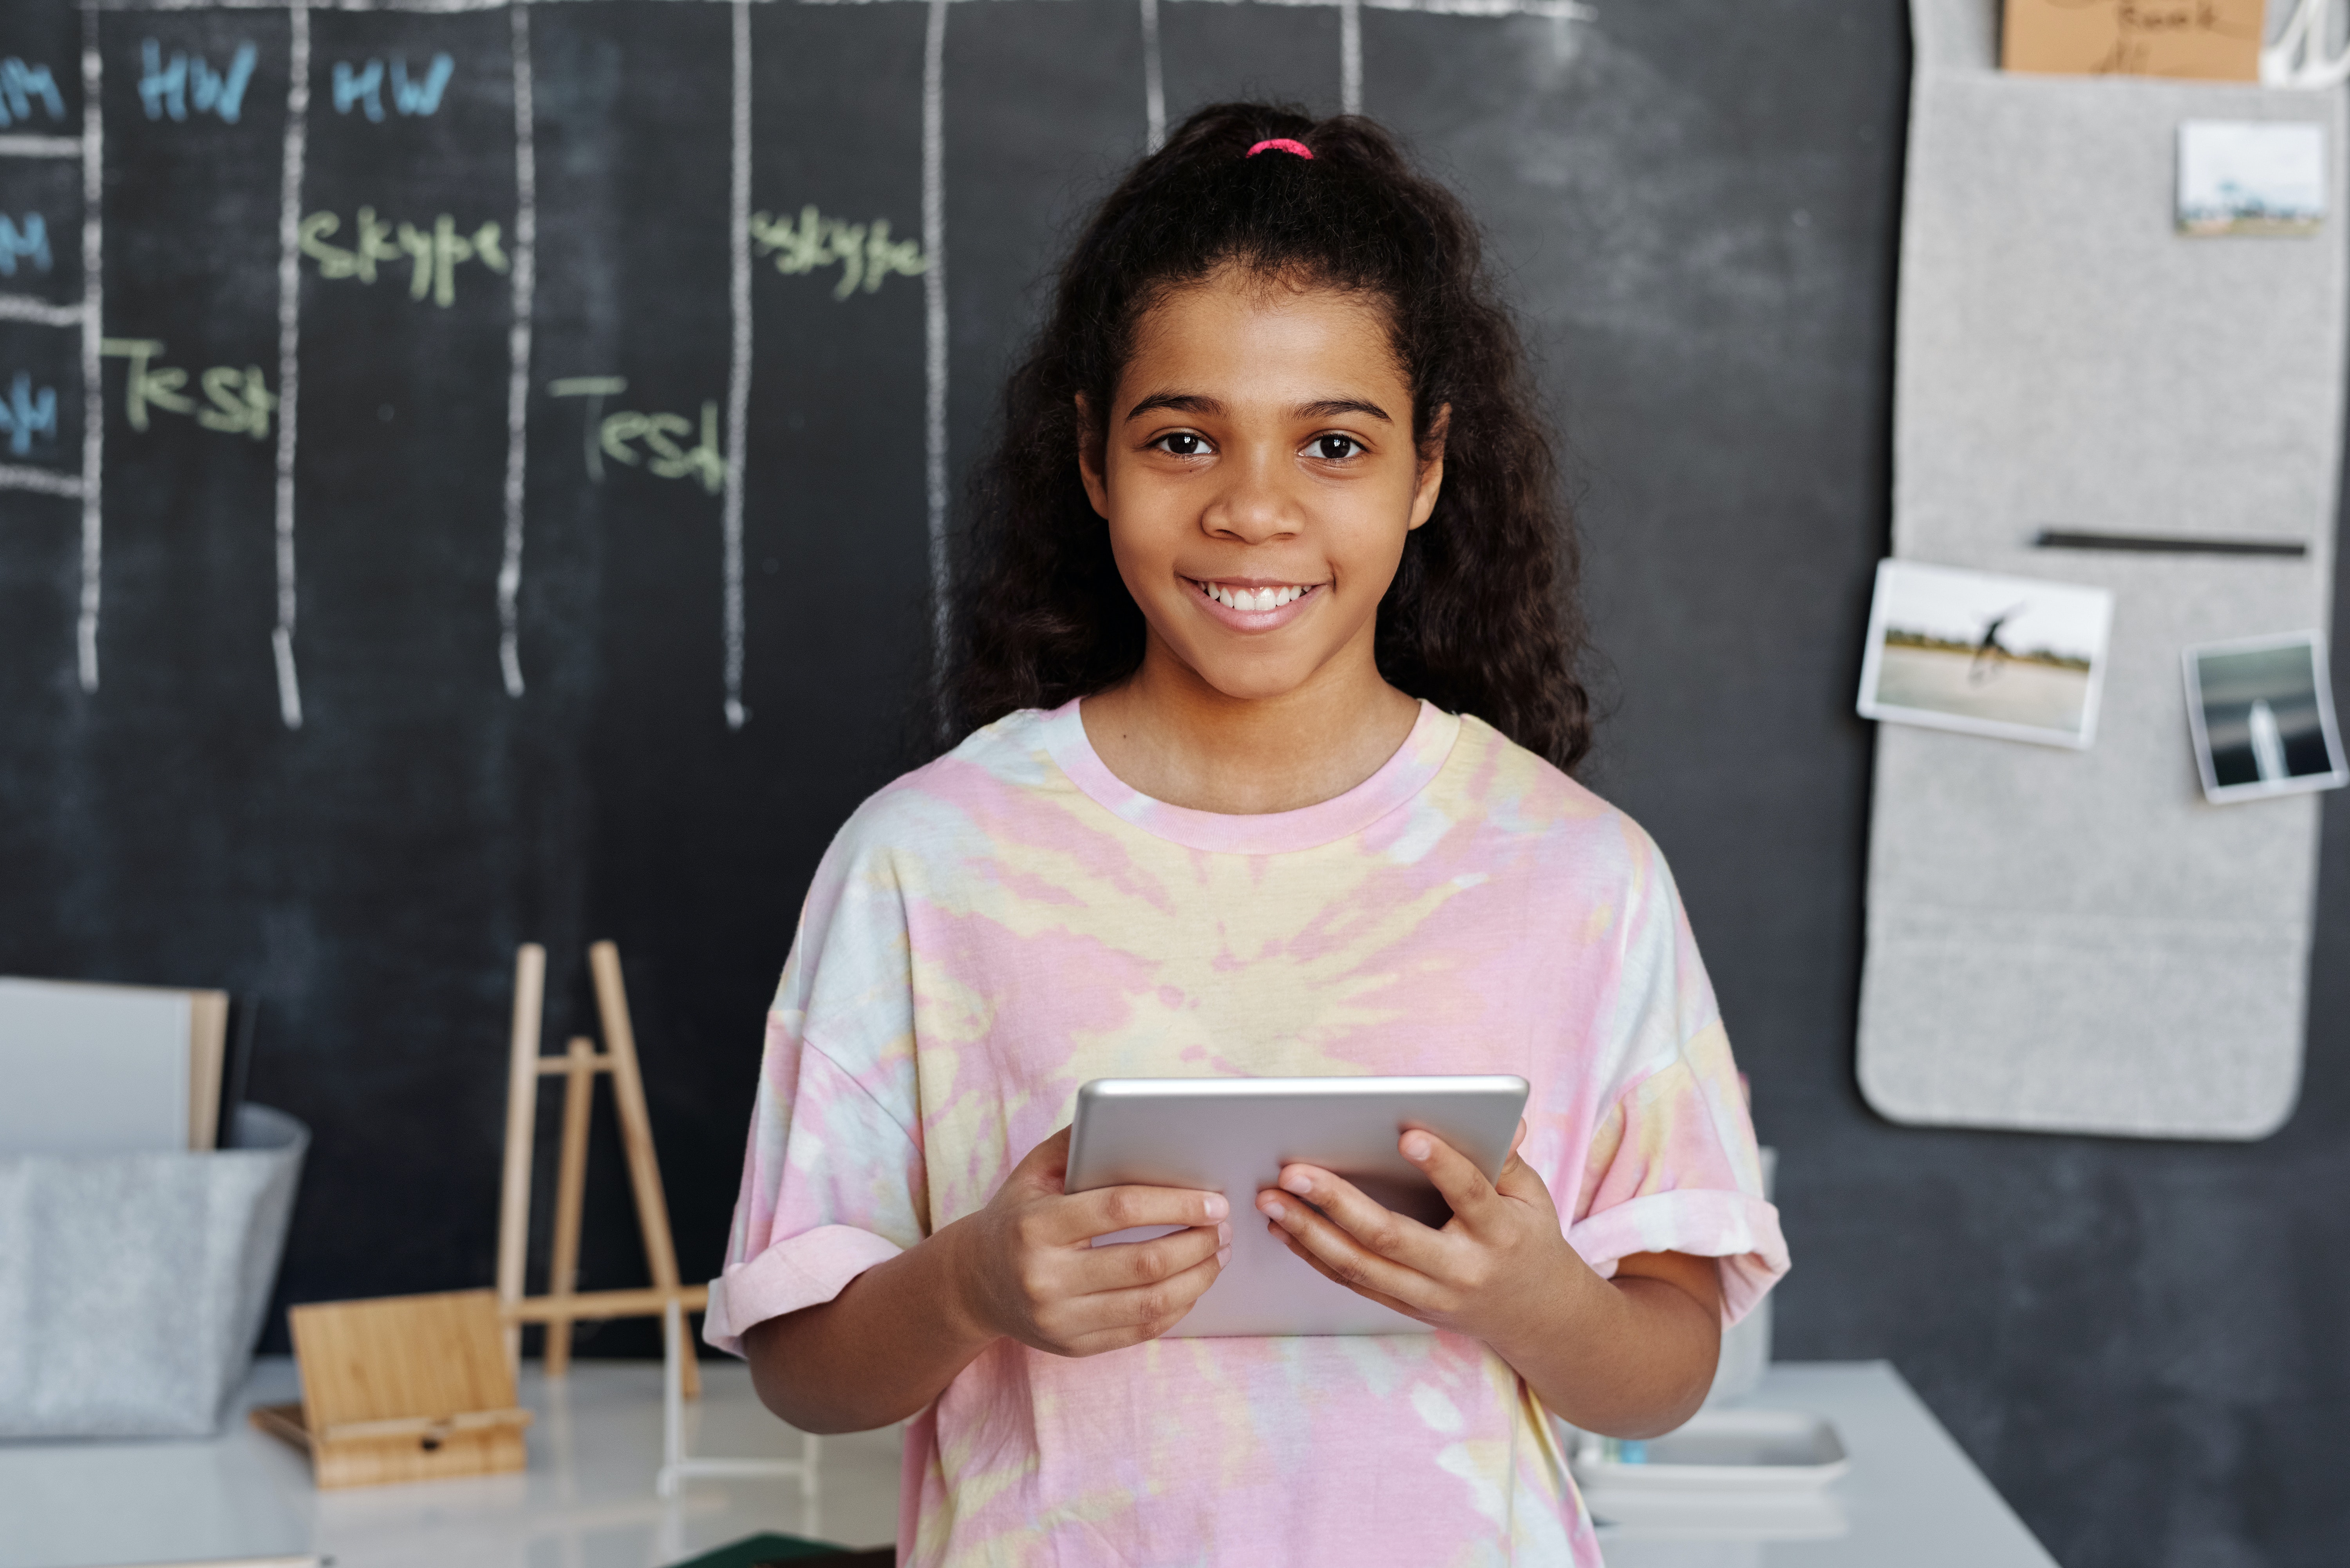 A young girl in a pink shirt holds a tablet in her classroom.